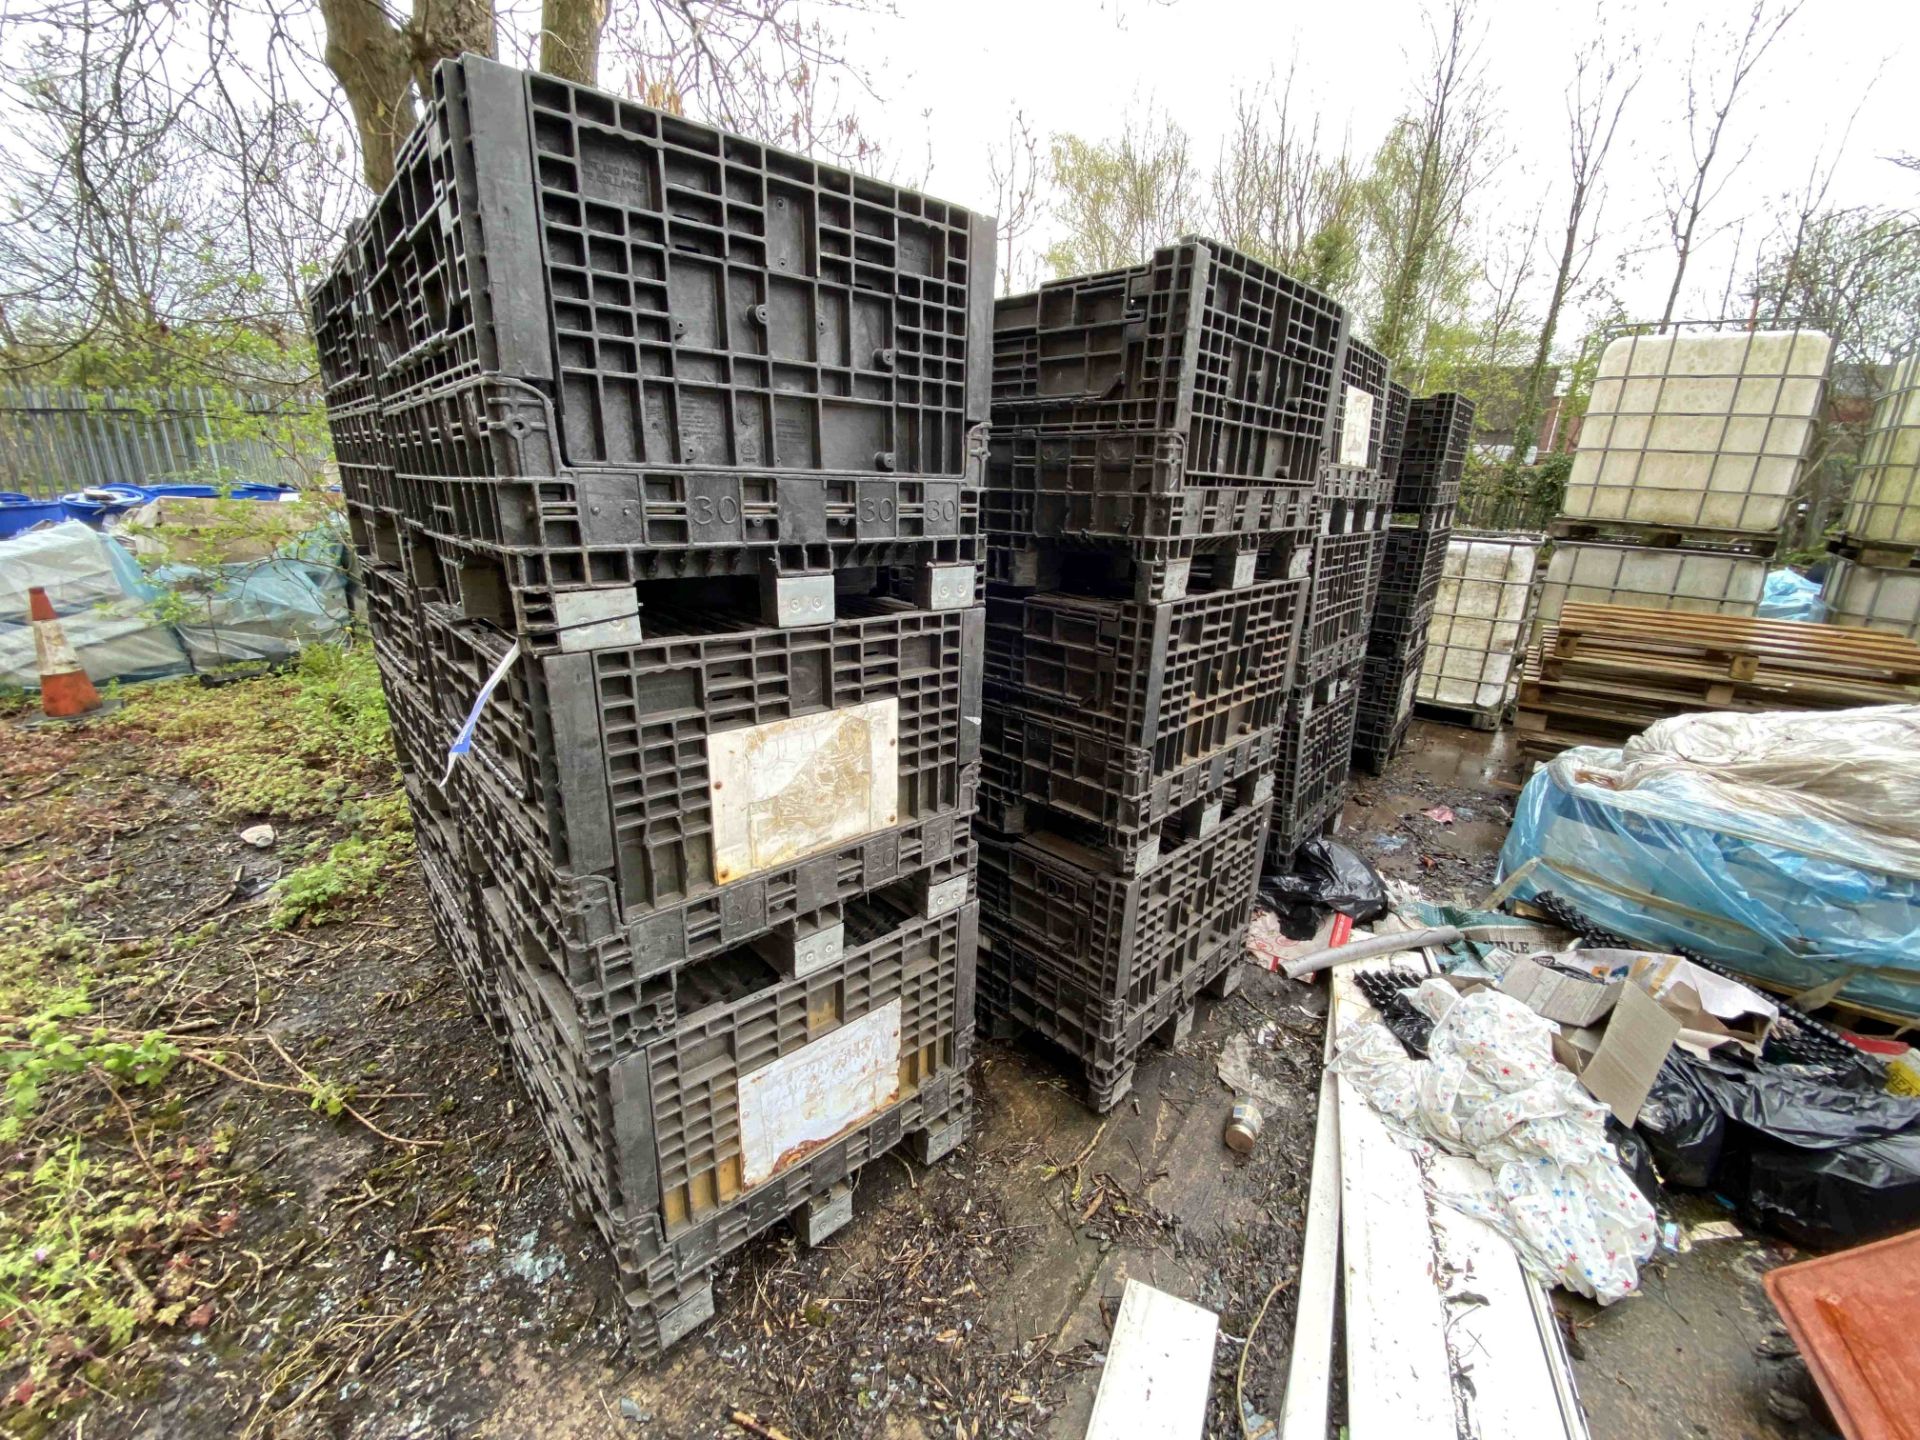 Approx. 30 Collapsible Side Plastic Crates, each approx. 750mm x 750mm x 400mm deep, with contents